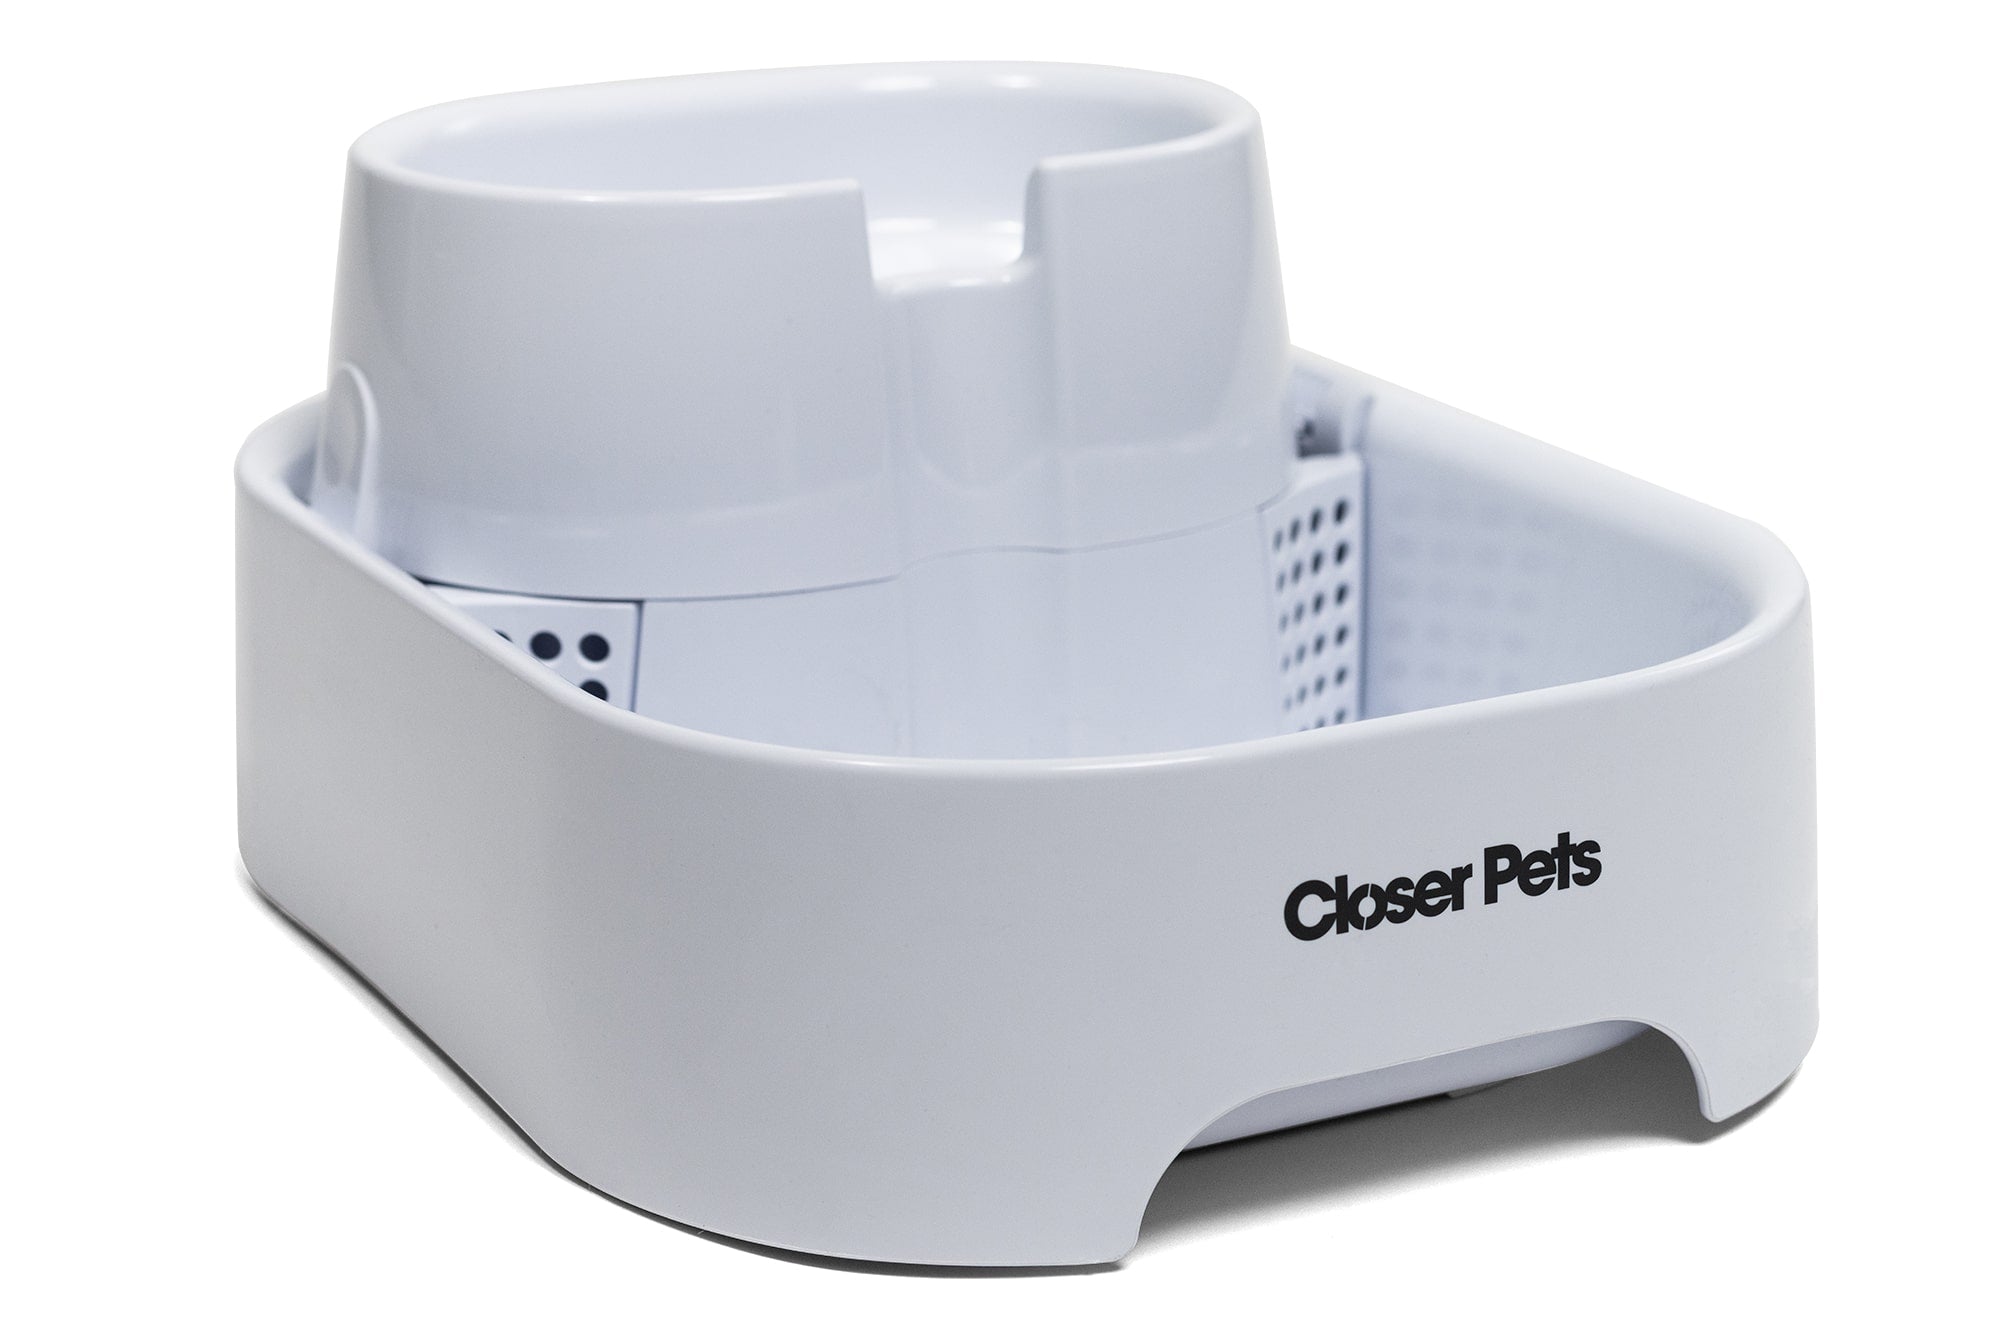 Closer Pets Large Two-level Six-litre Pet Fountain – White (CP 385)